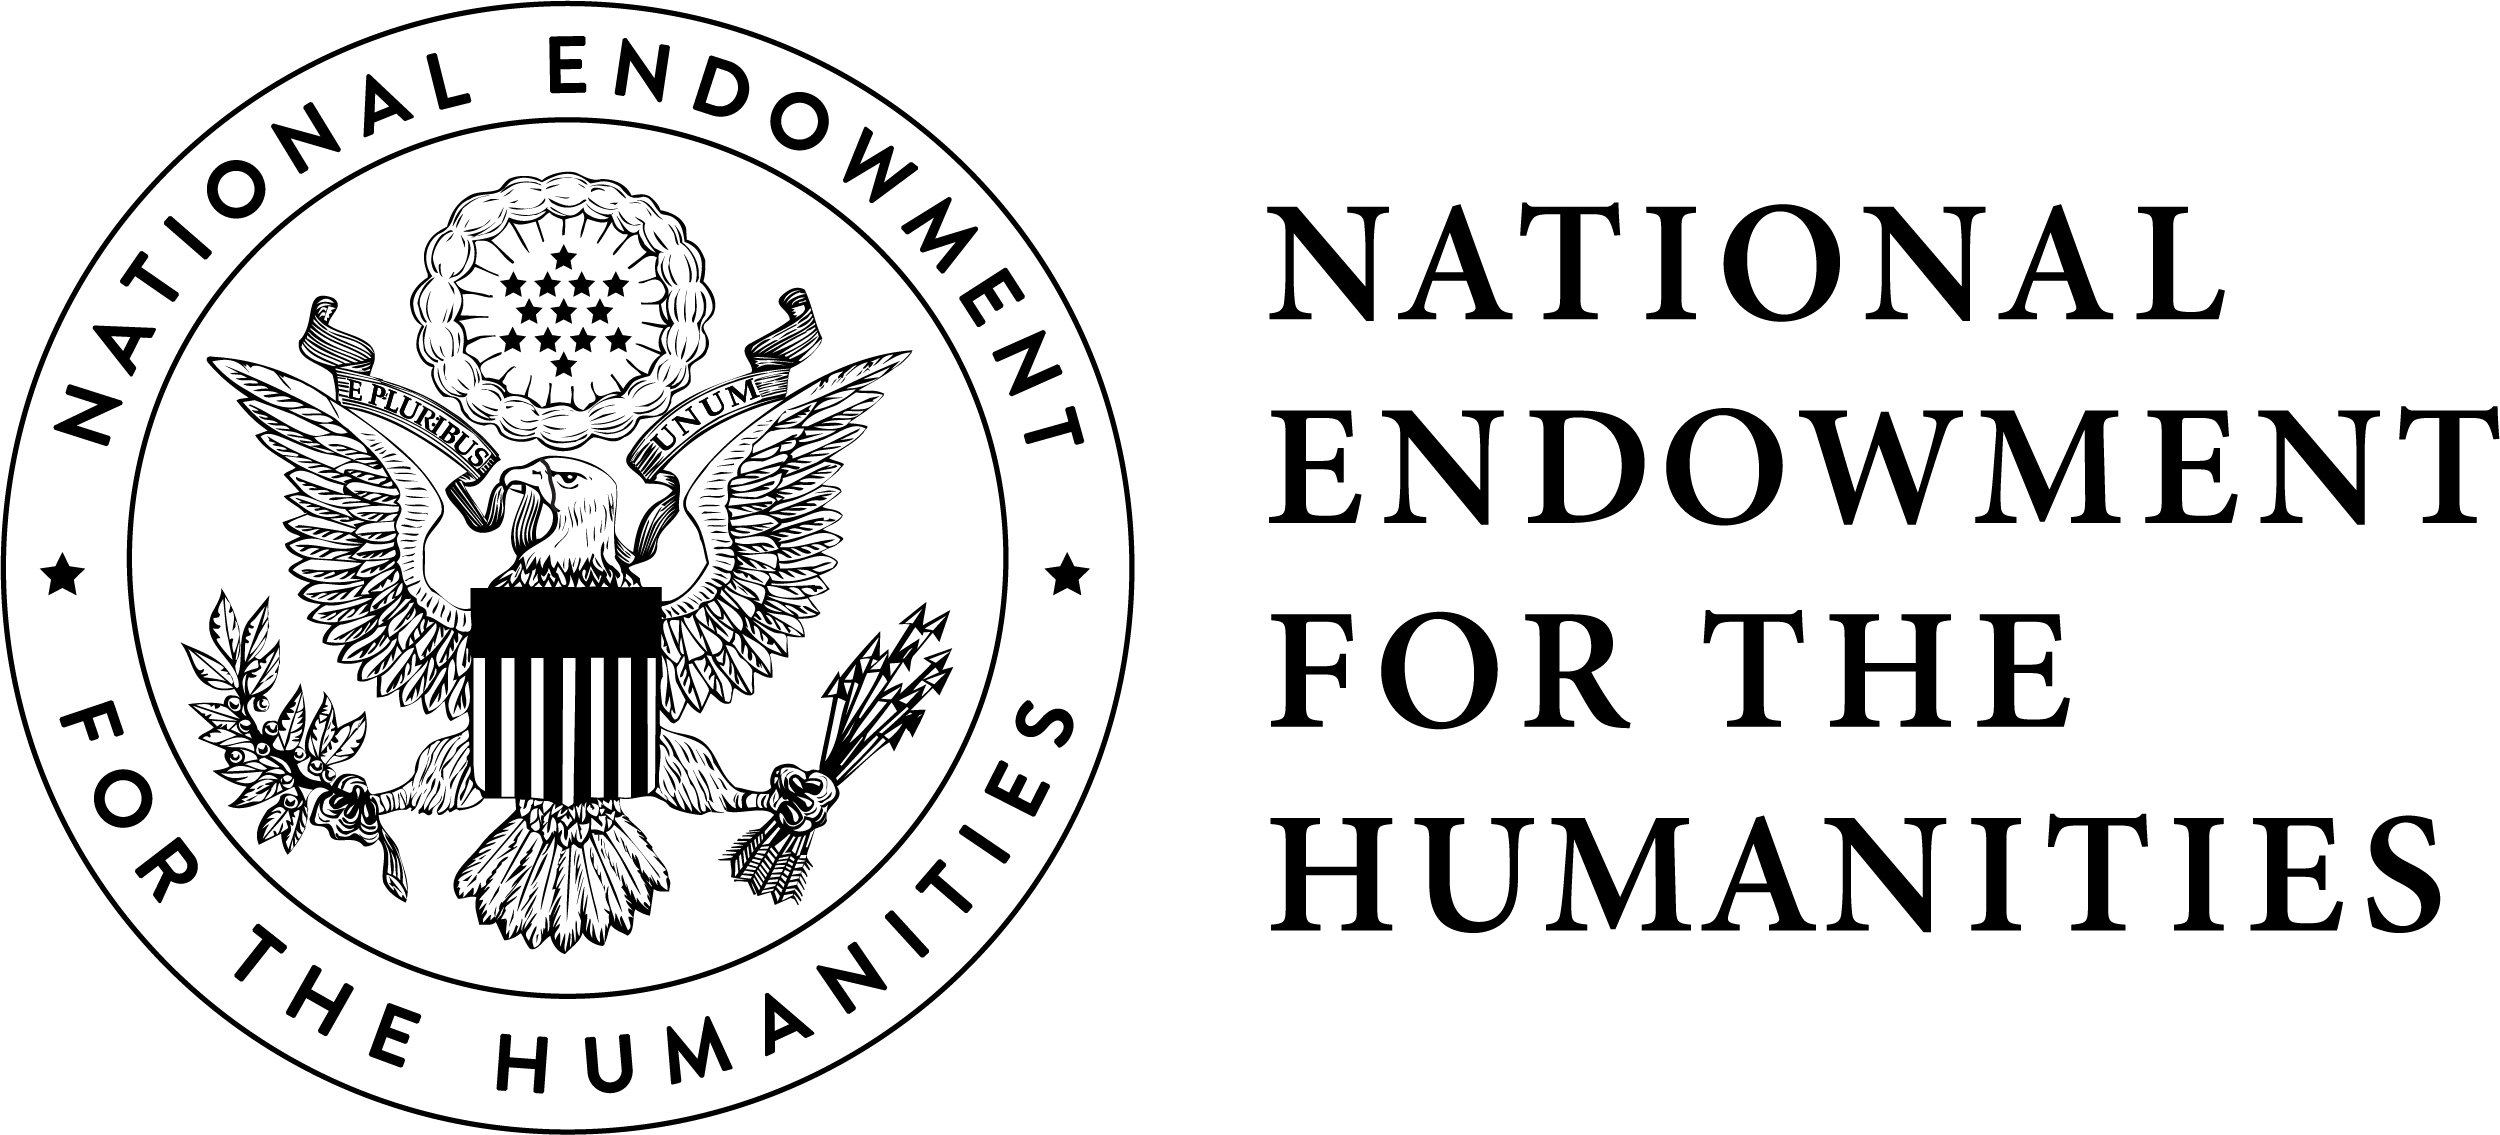 National Endowement for the Humanities